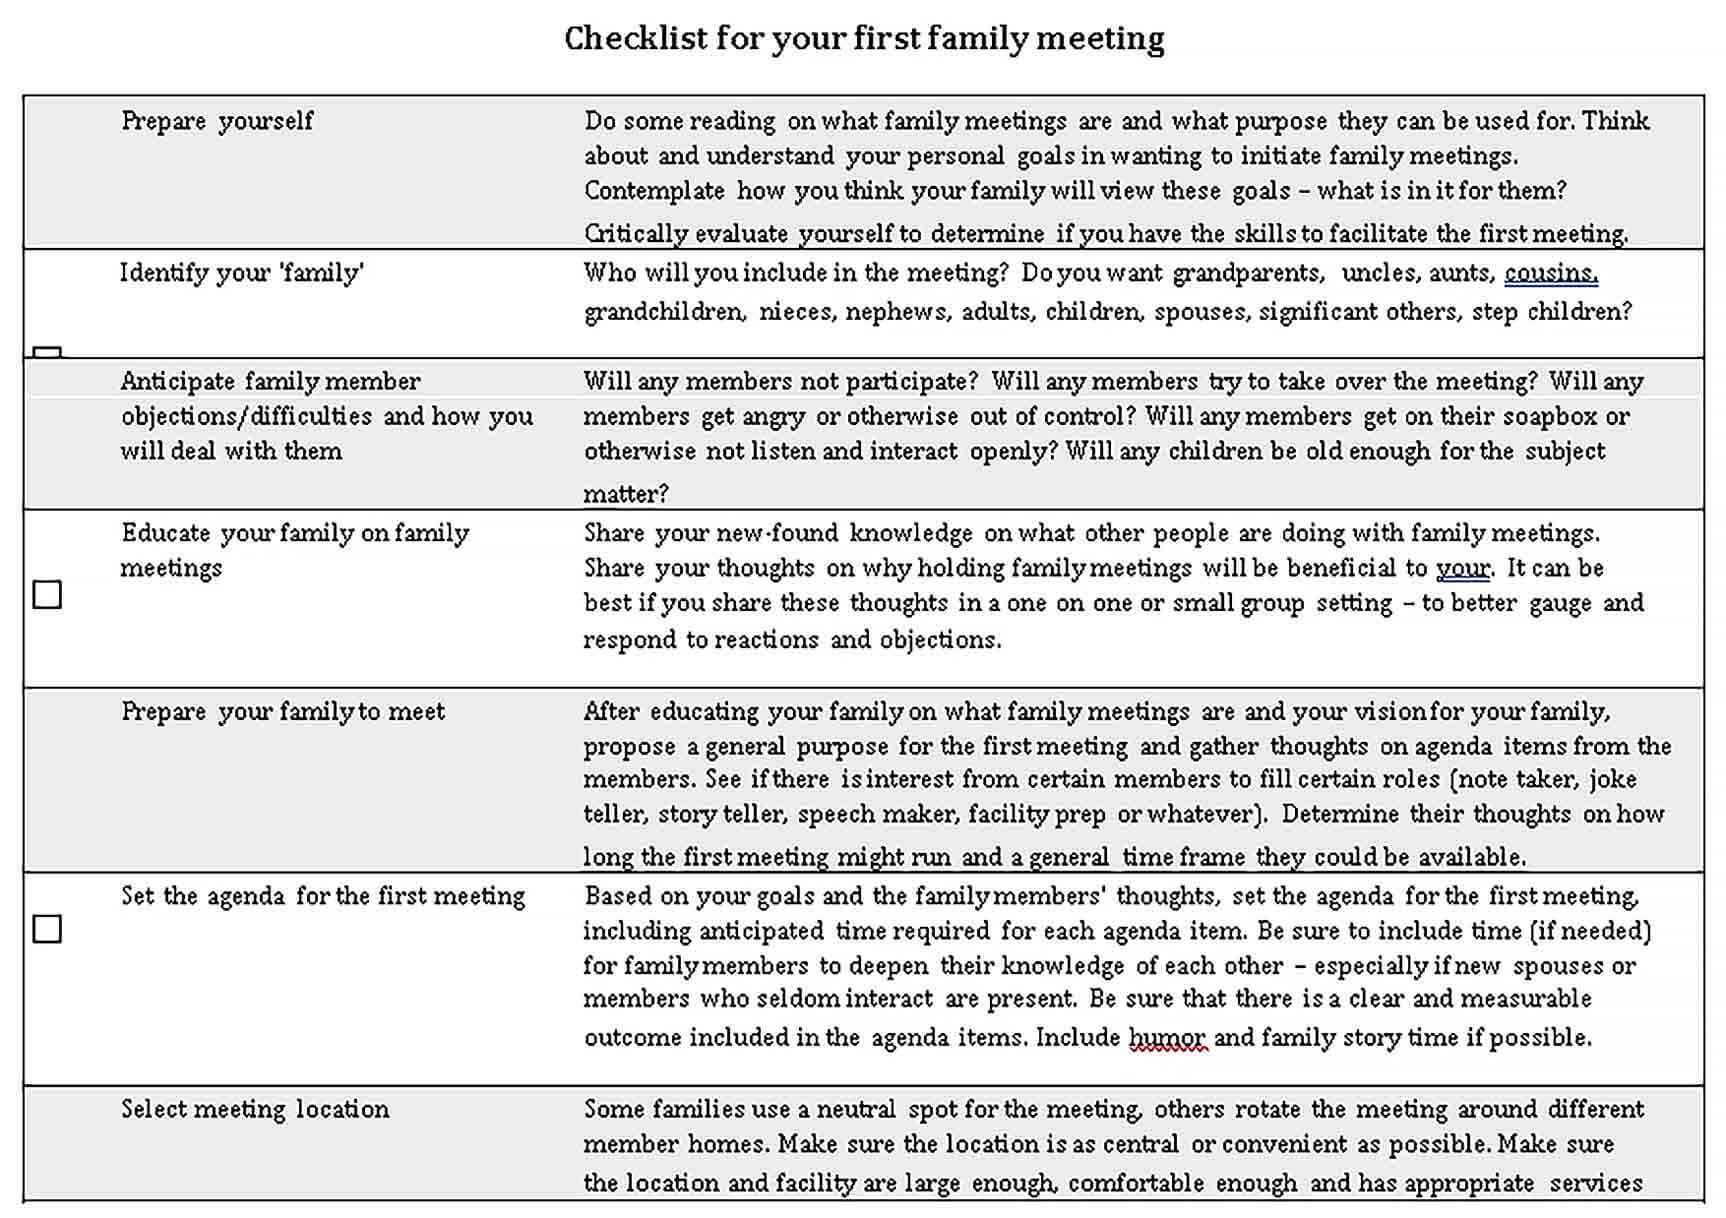 Sample Family Meeting Checklist Template